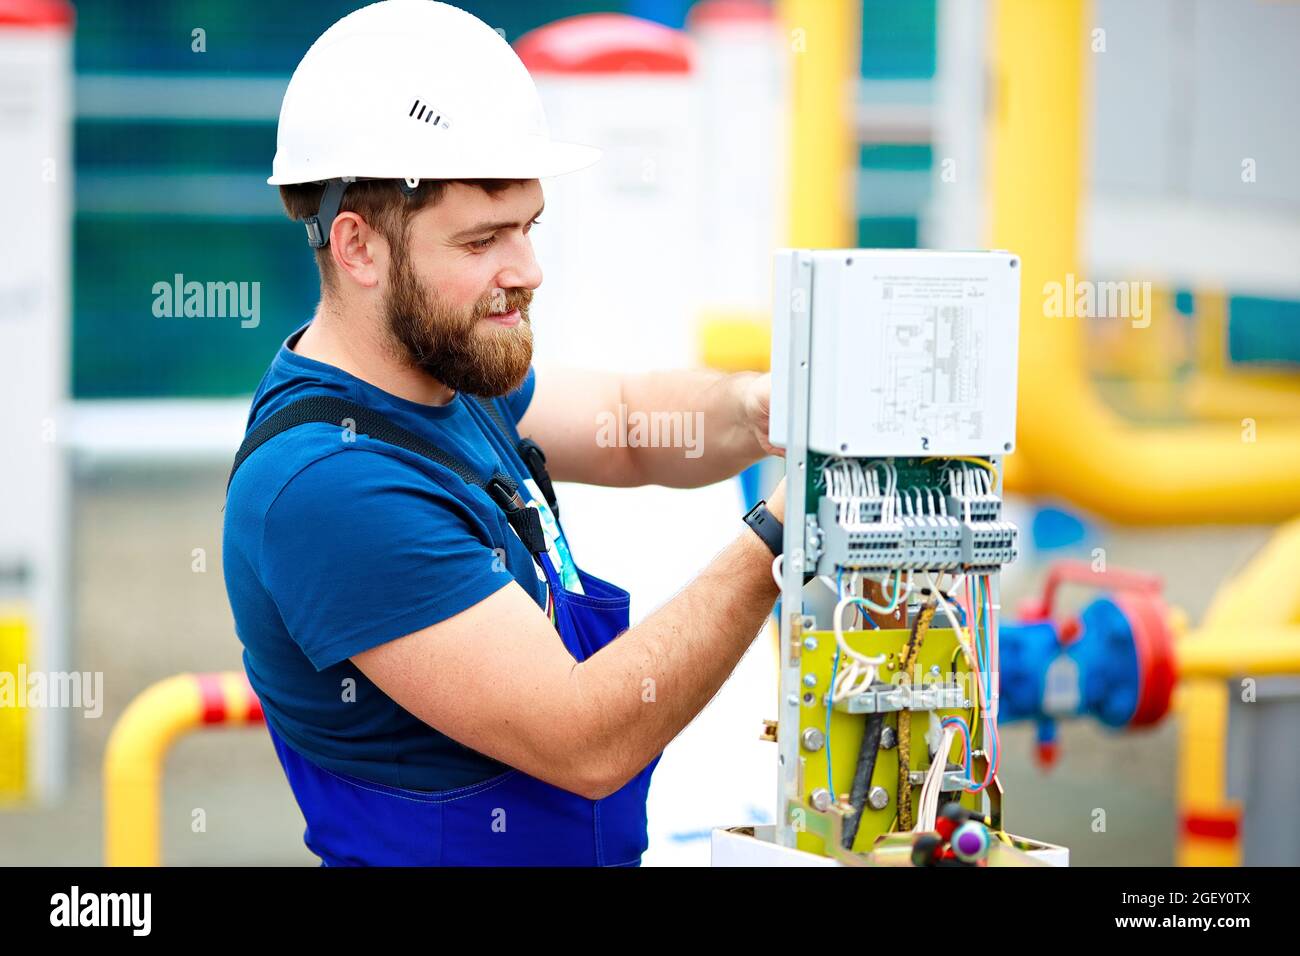 An engineer in a helmet and work clothes adjusts and inspects the equipment at the production facility. An authentic portrait of a Caucasian man with a beard at work. Stock Photo